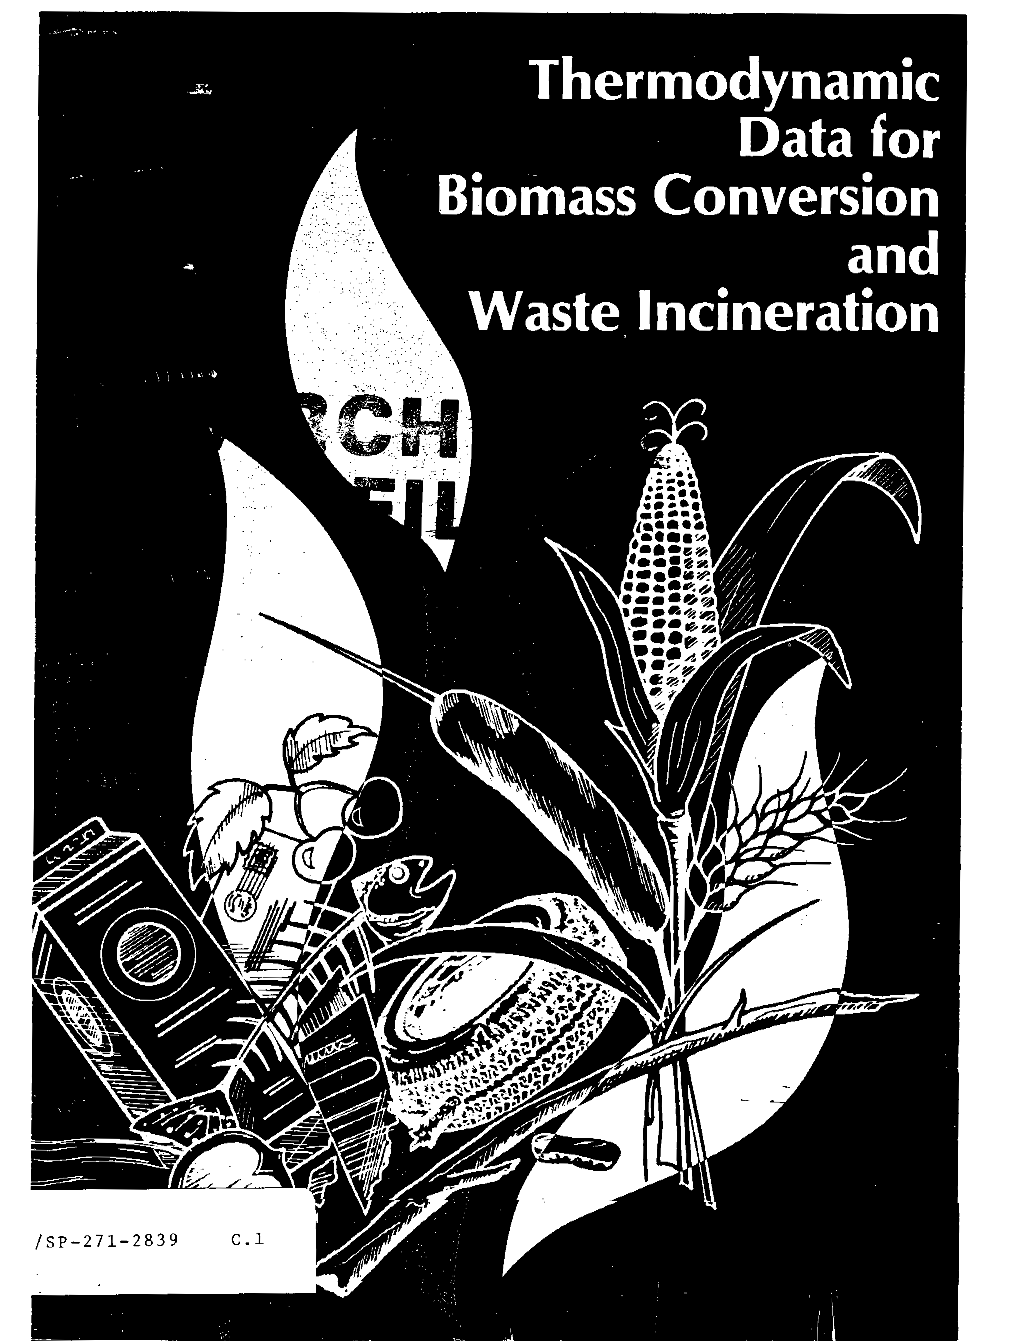 Thermodynamic Data for Biomass Conversion and Waste Incineration